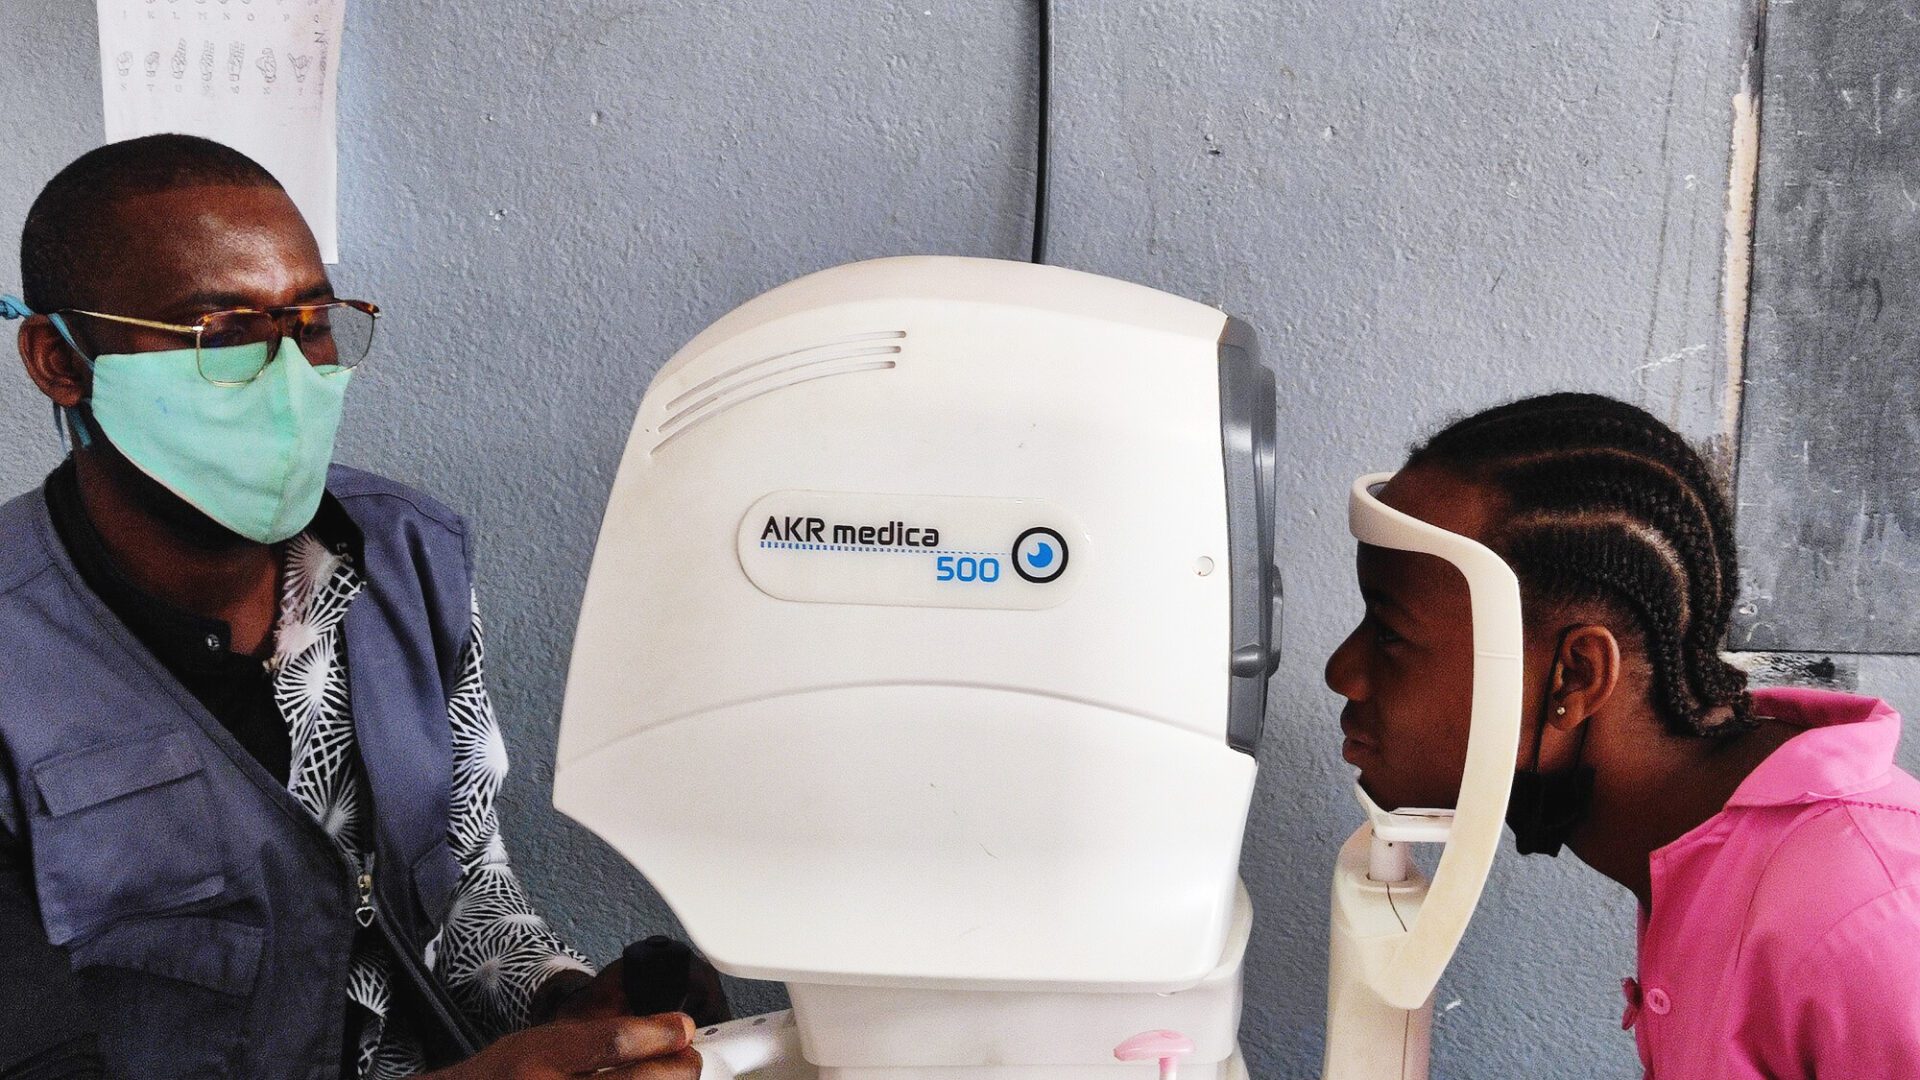 A health worker examines an adolescent boy's eyes using an autorefractor.